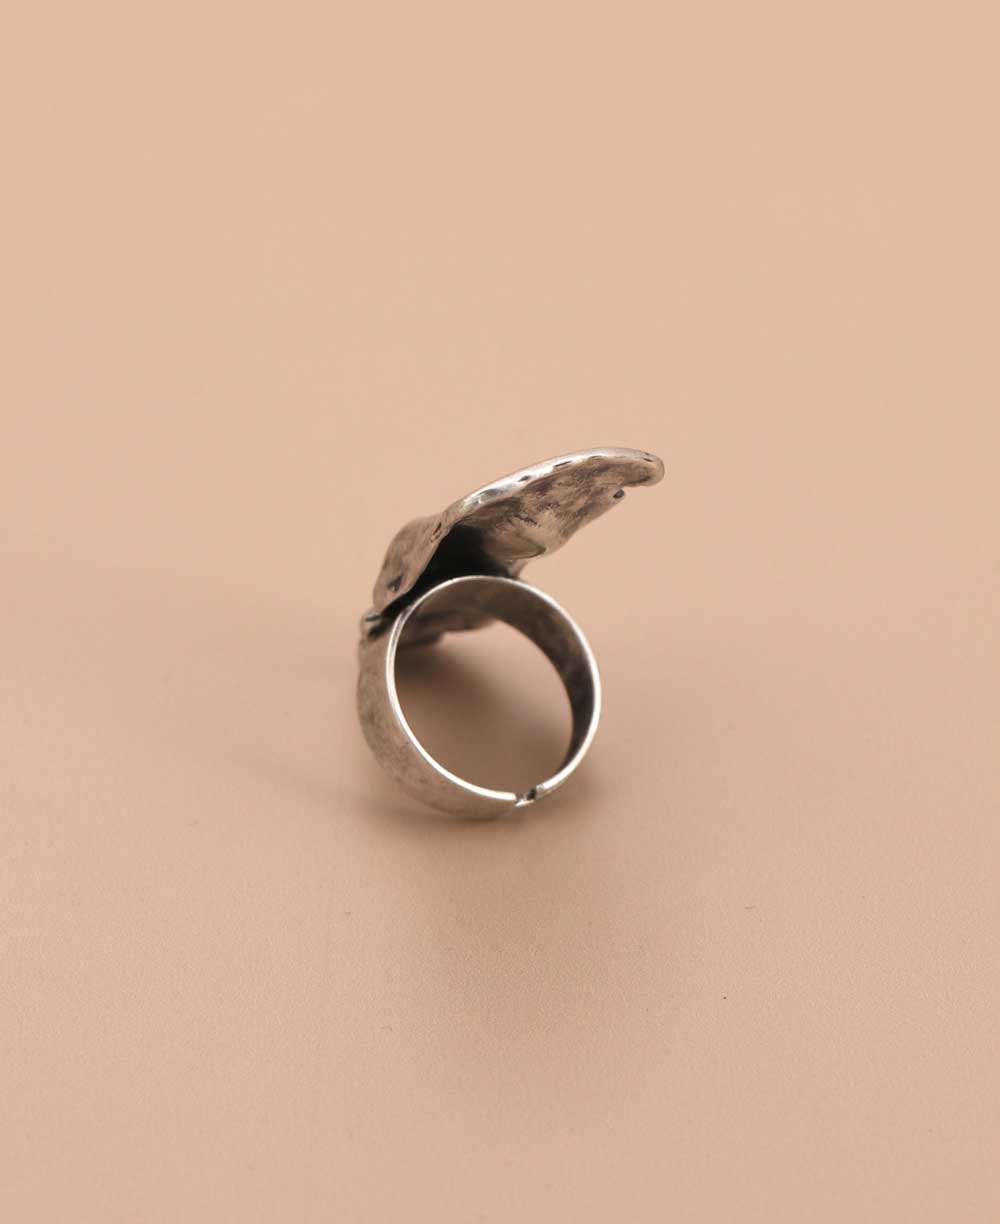 Handcrafted pewter face ring